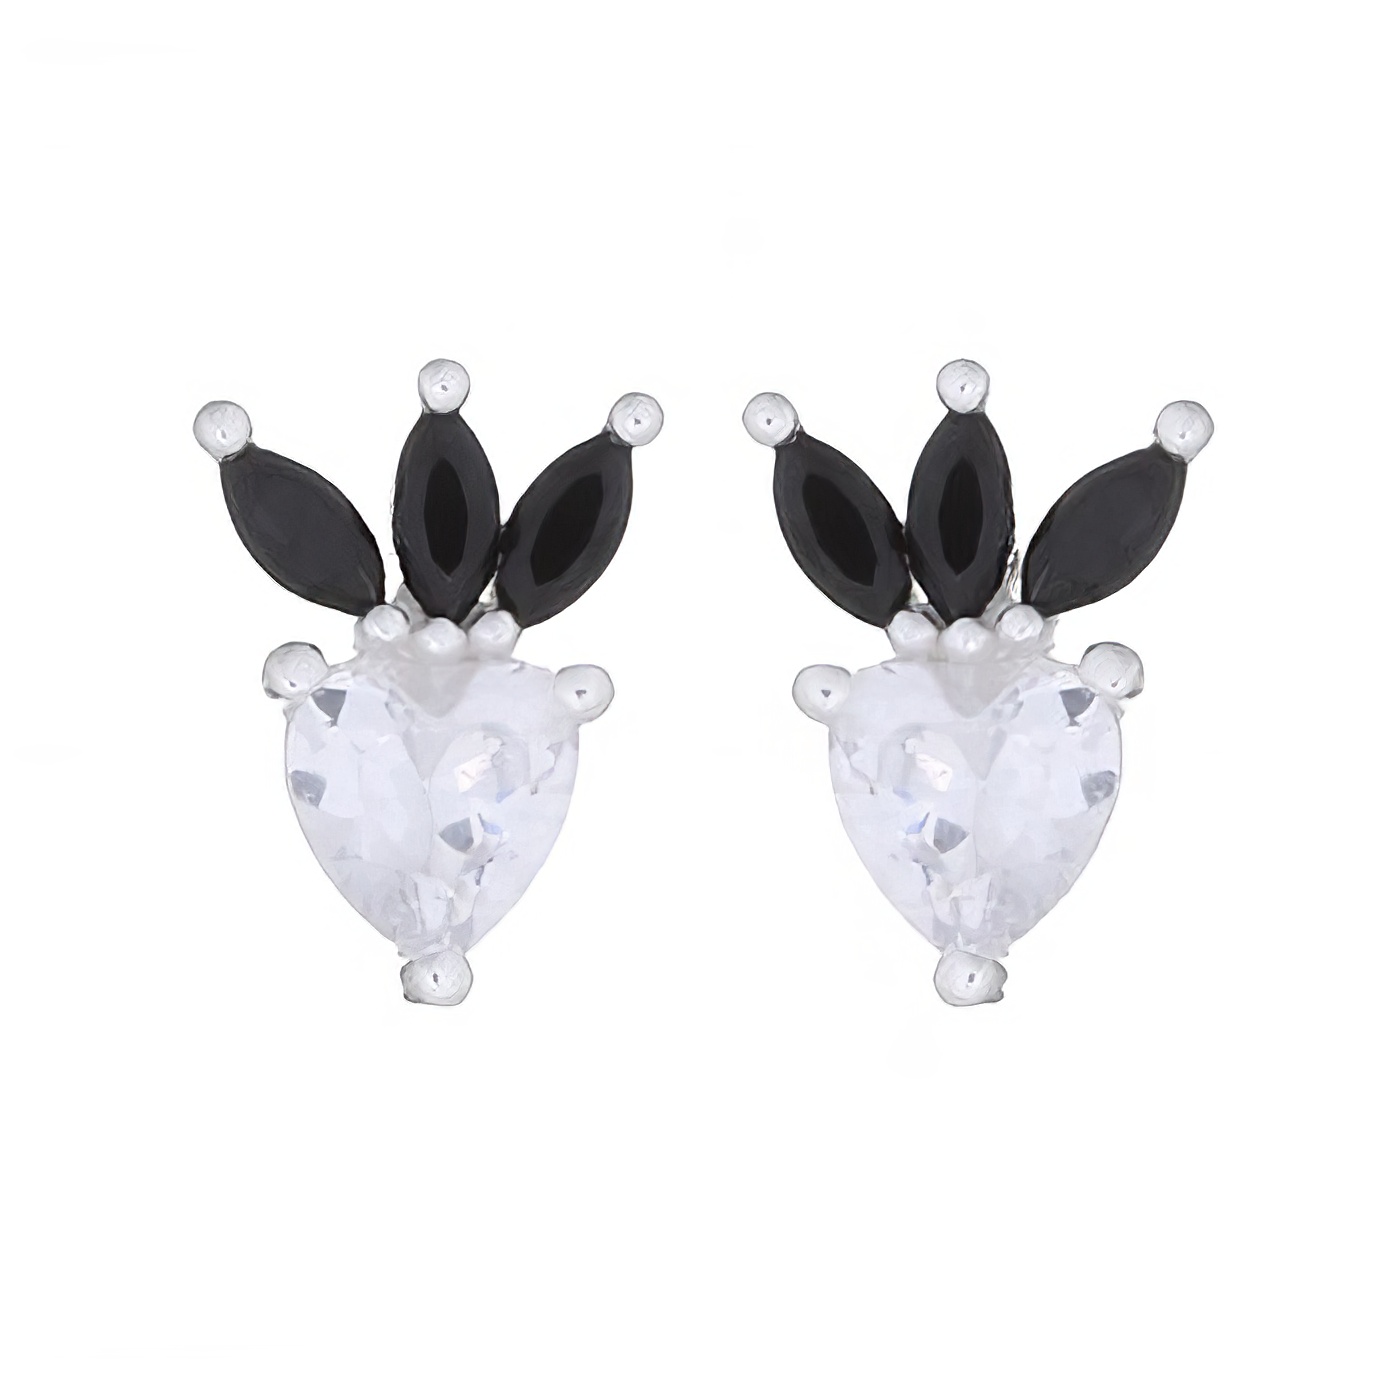 Delightful Strawberry 925 Silver Stud Earrings With Black White CZ by BeYindi 